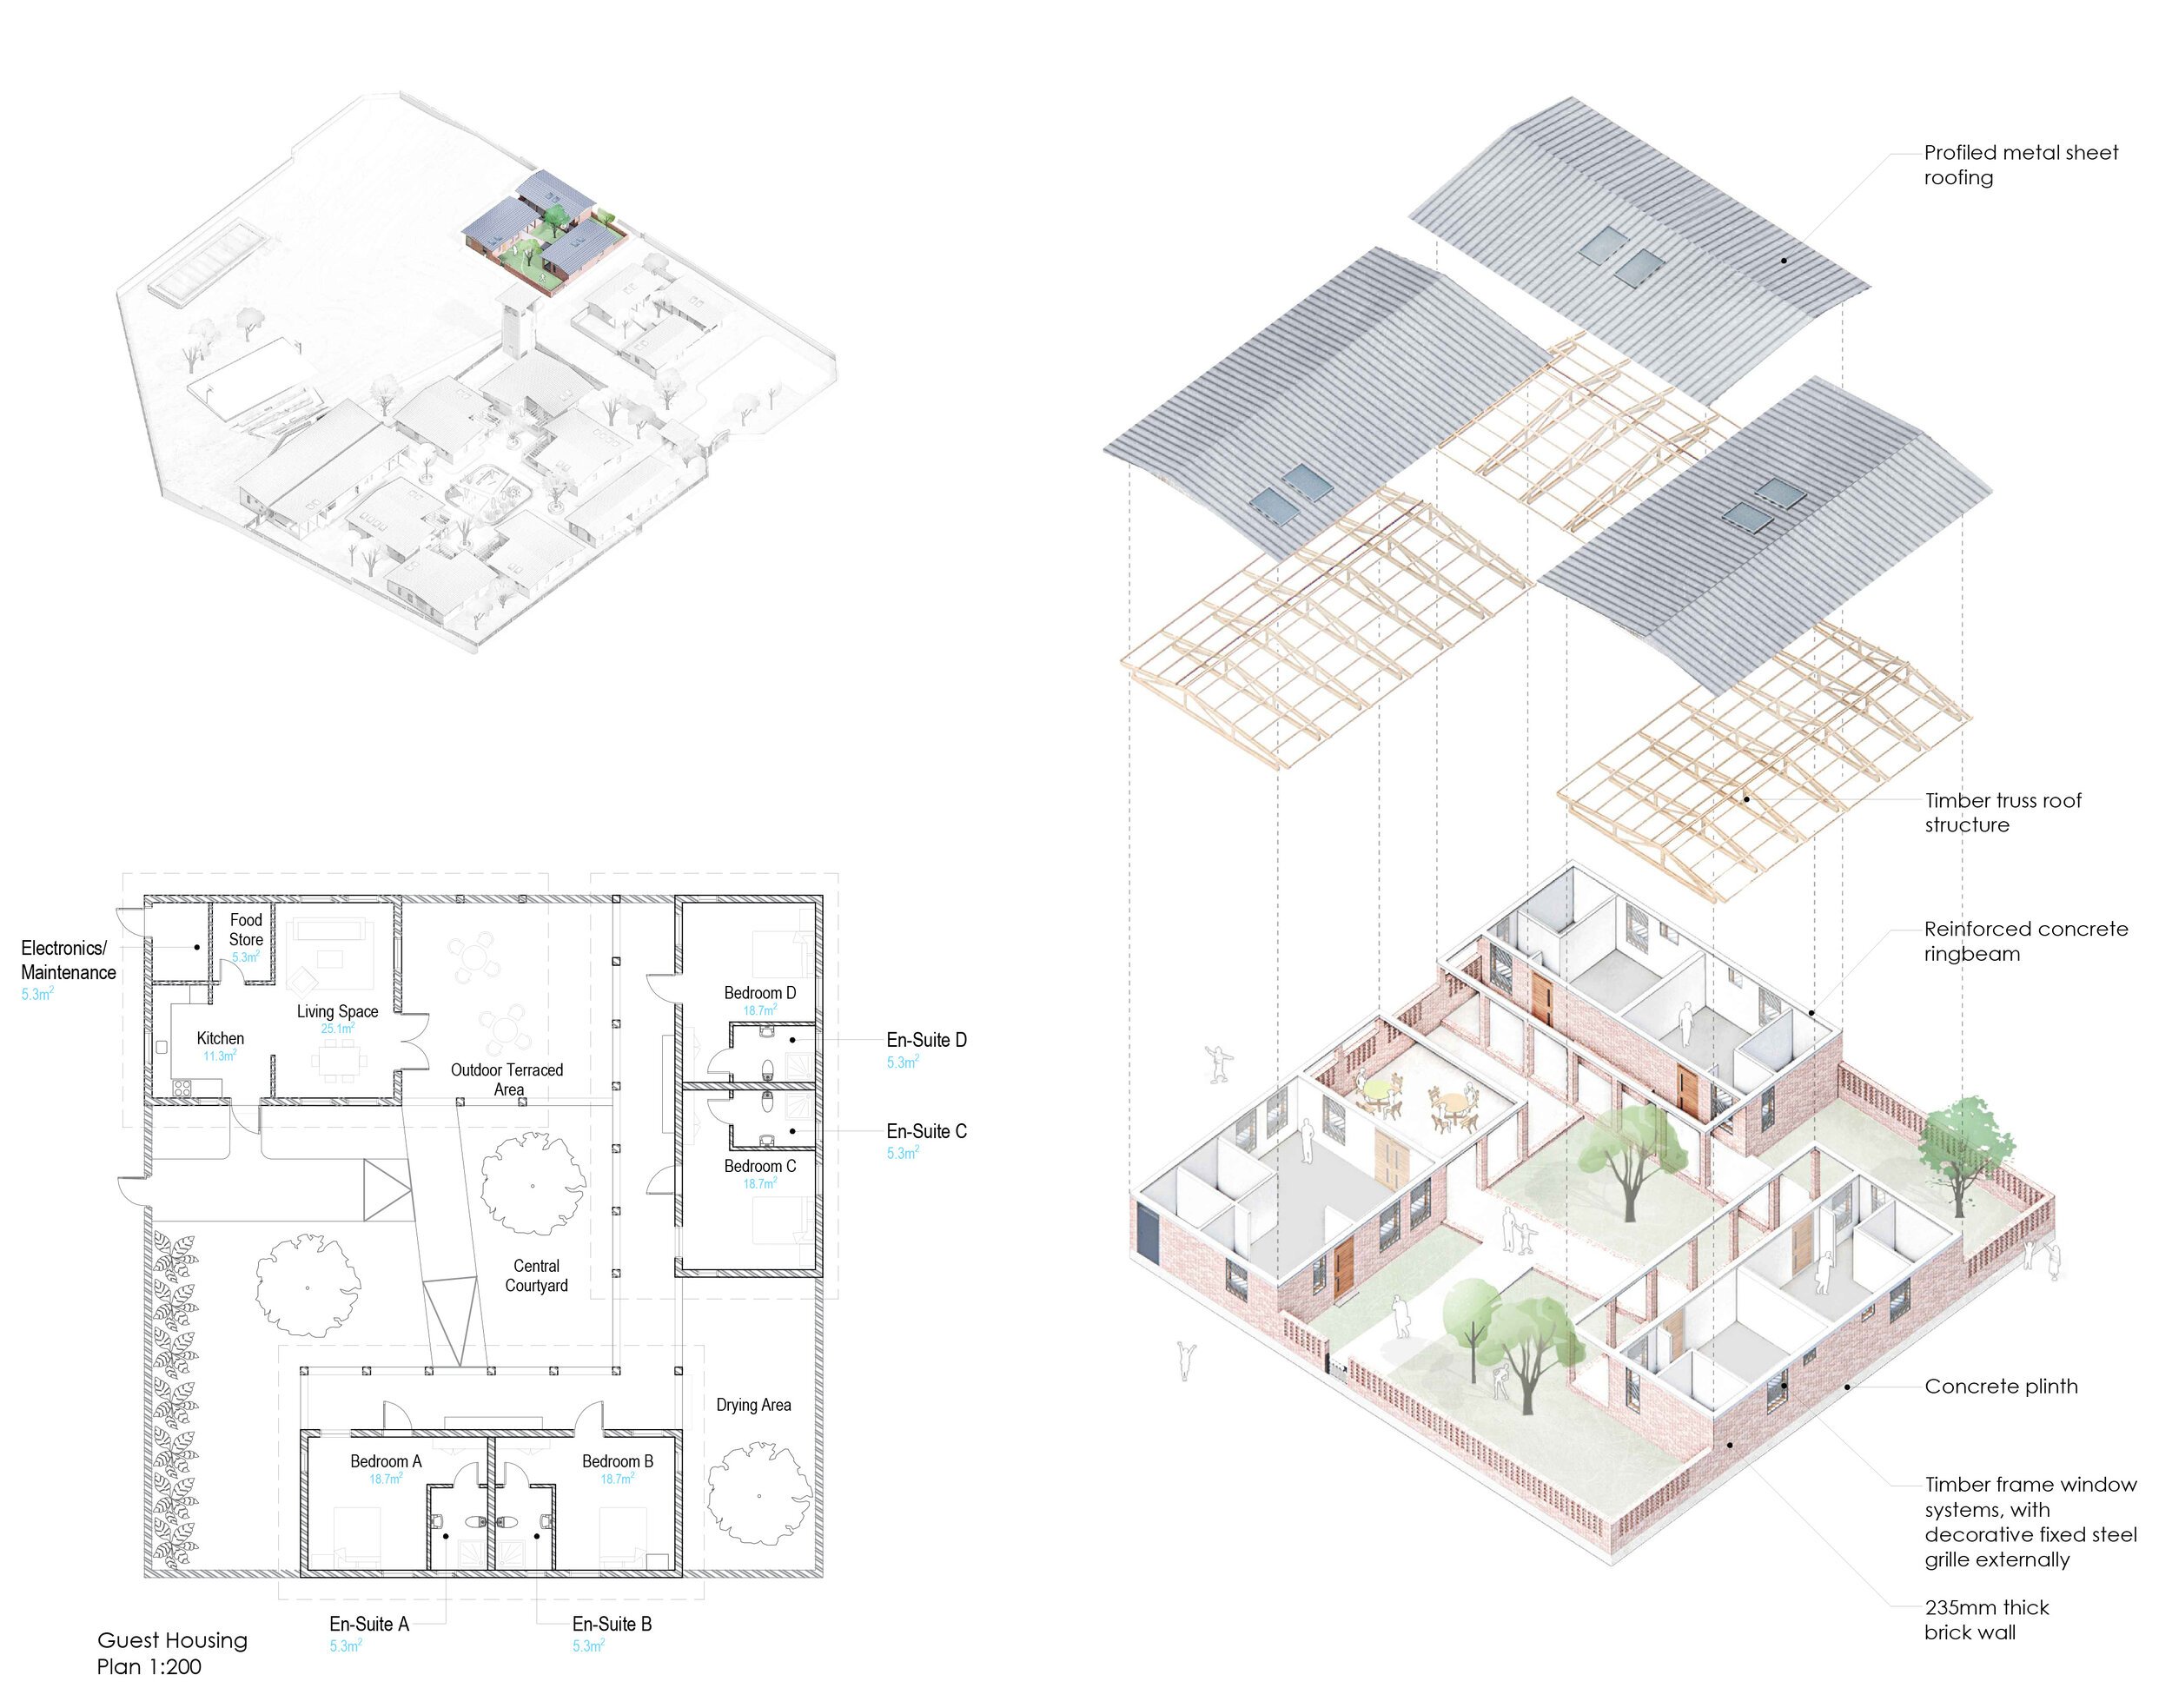 091-A25-ST-XX-DR-A-9058+3D+Exploded+Axonometric+I+Proposed+Guest+Housing.jpg